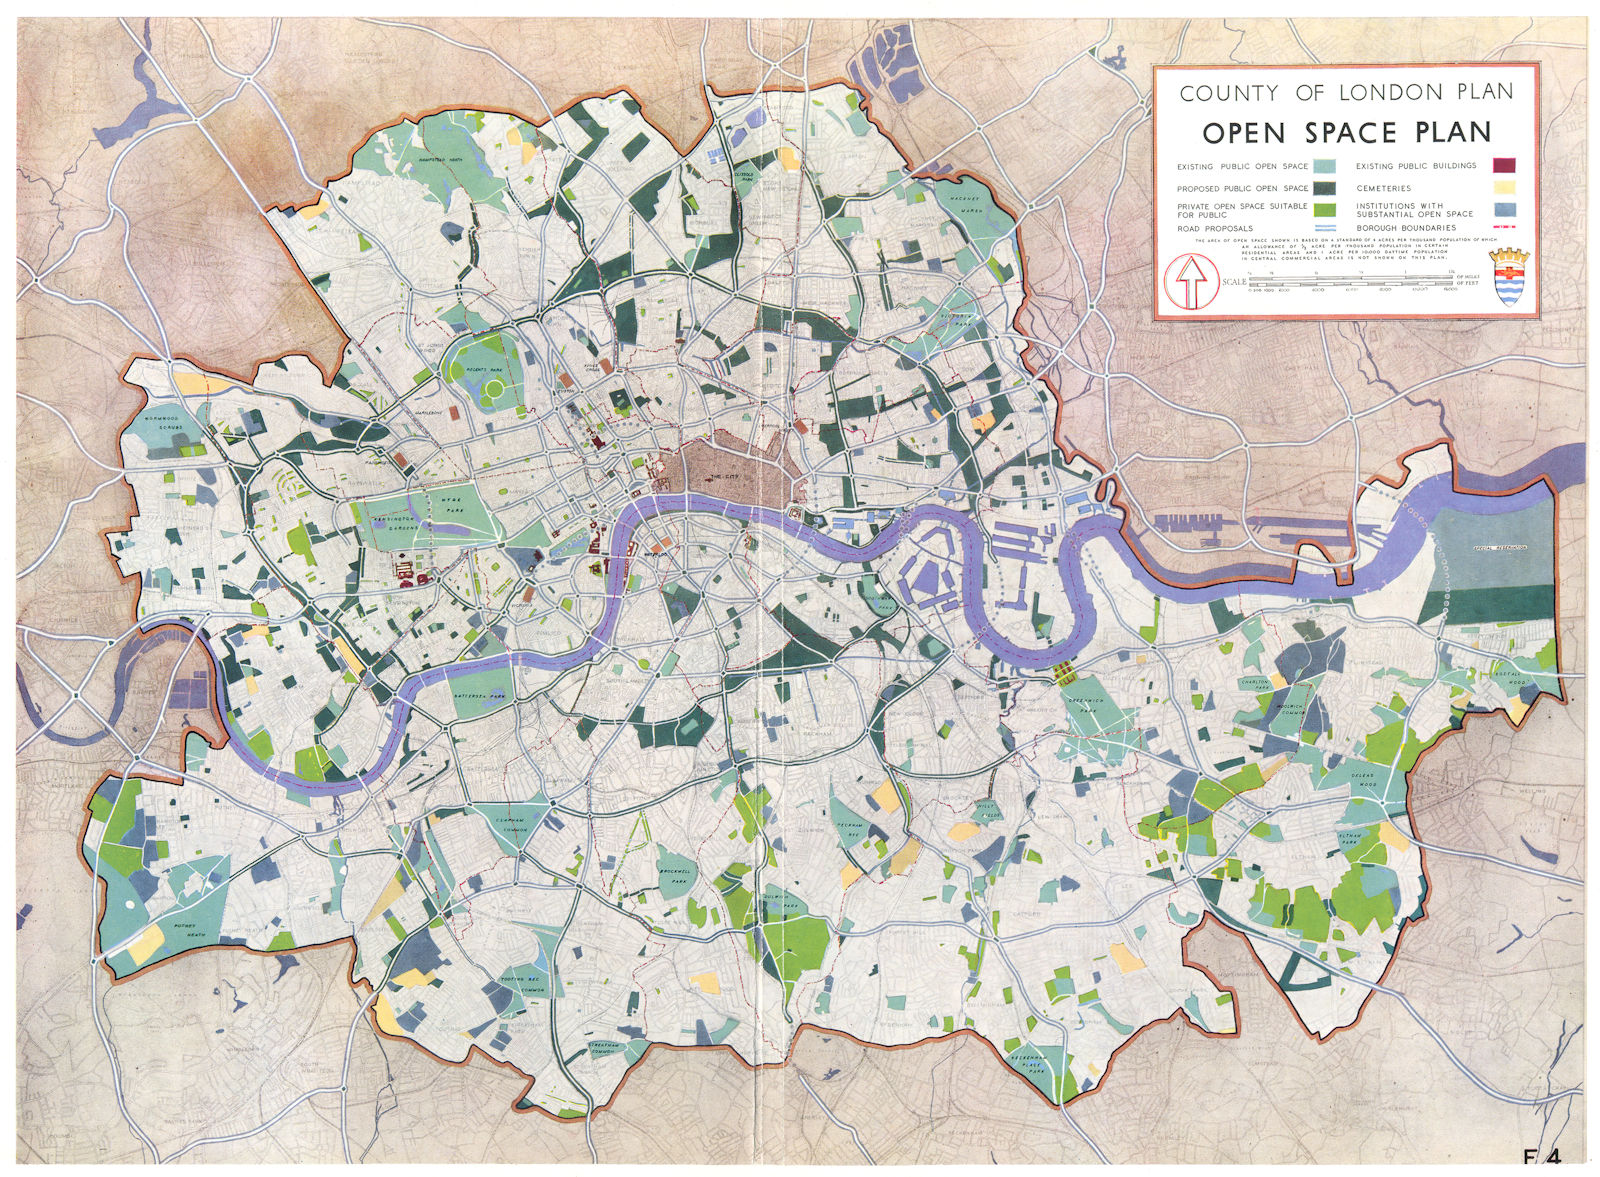 LONDON. Open spaces & Park system. Existing & planned parks & roads 1943 map